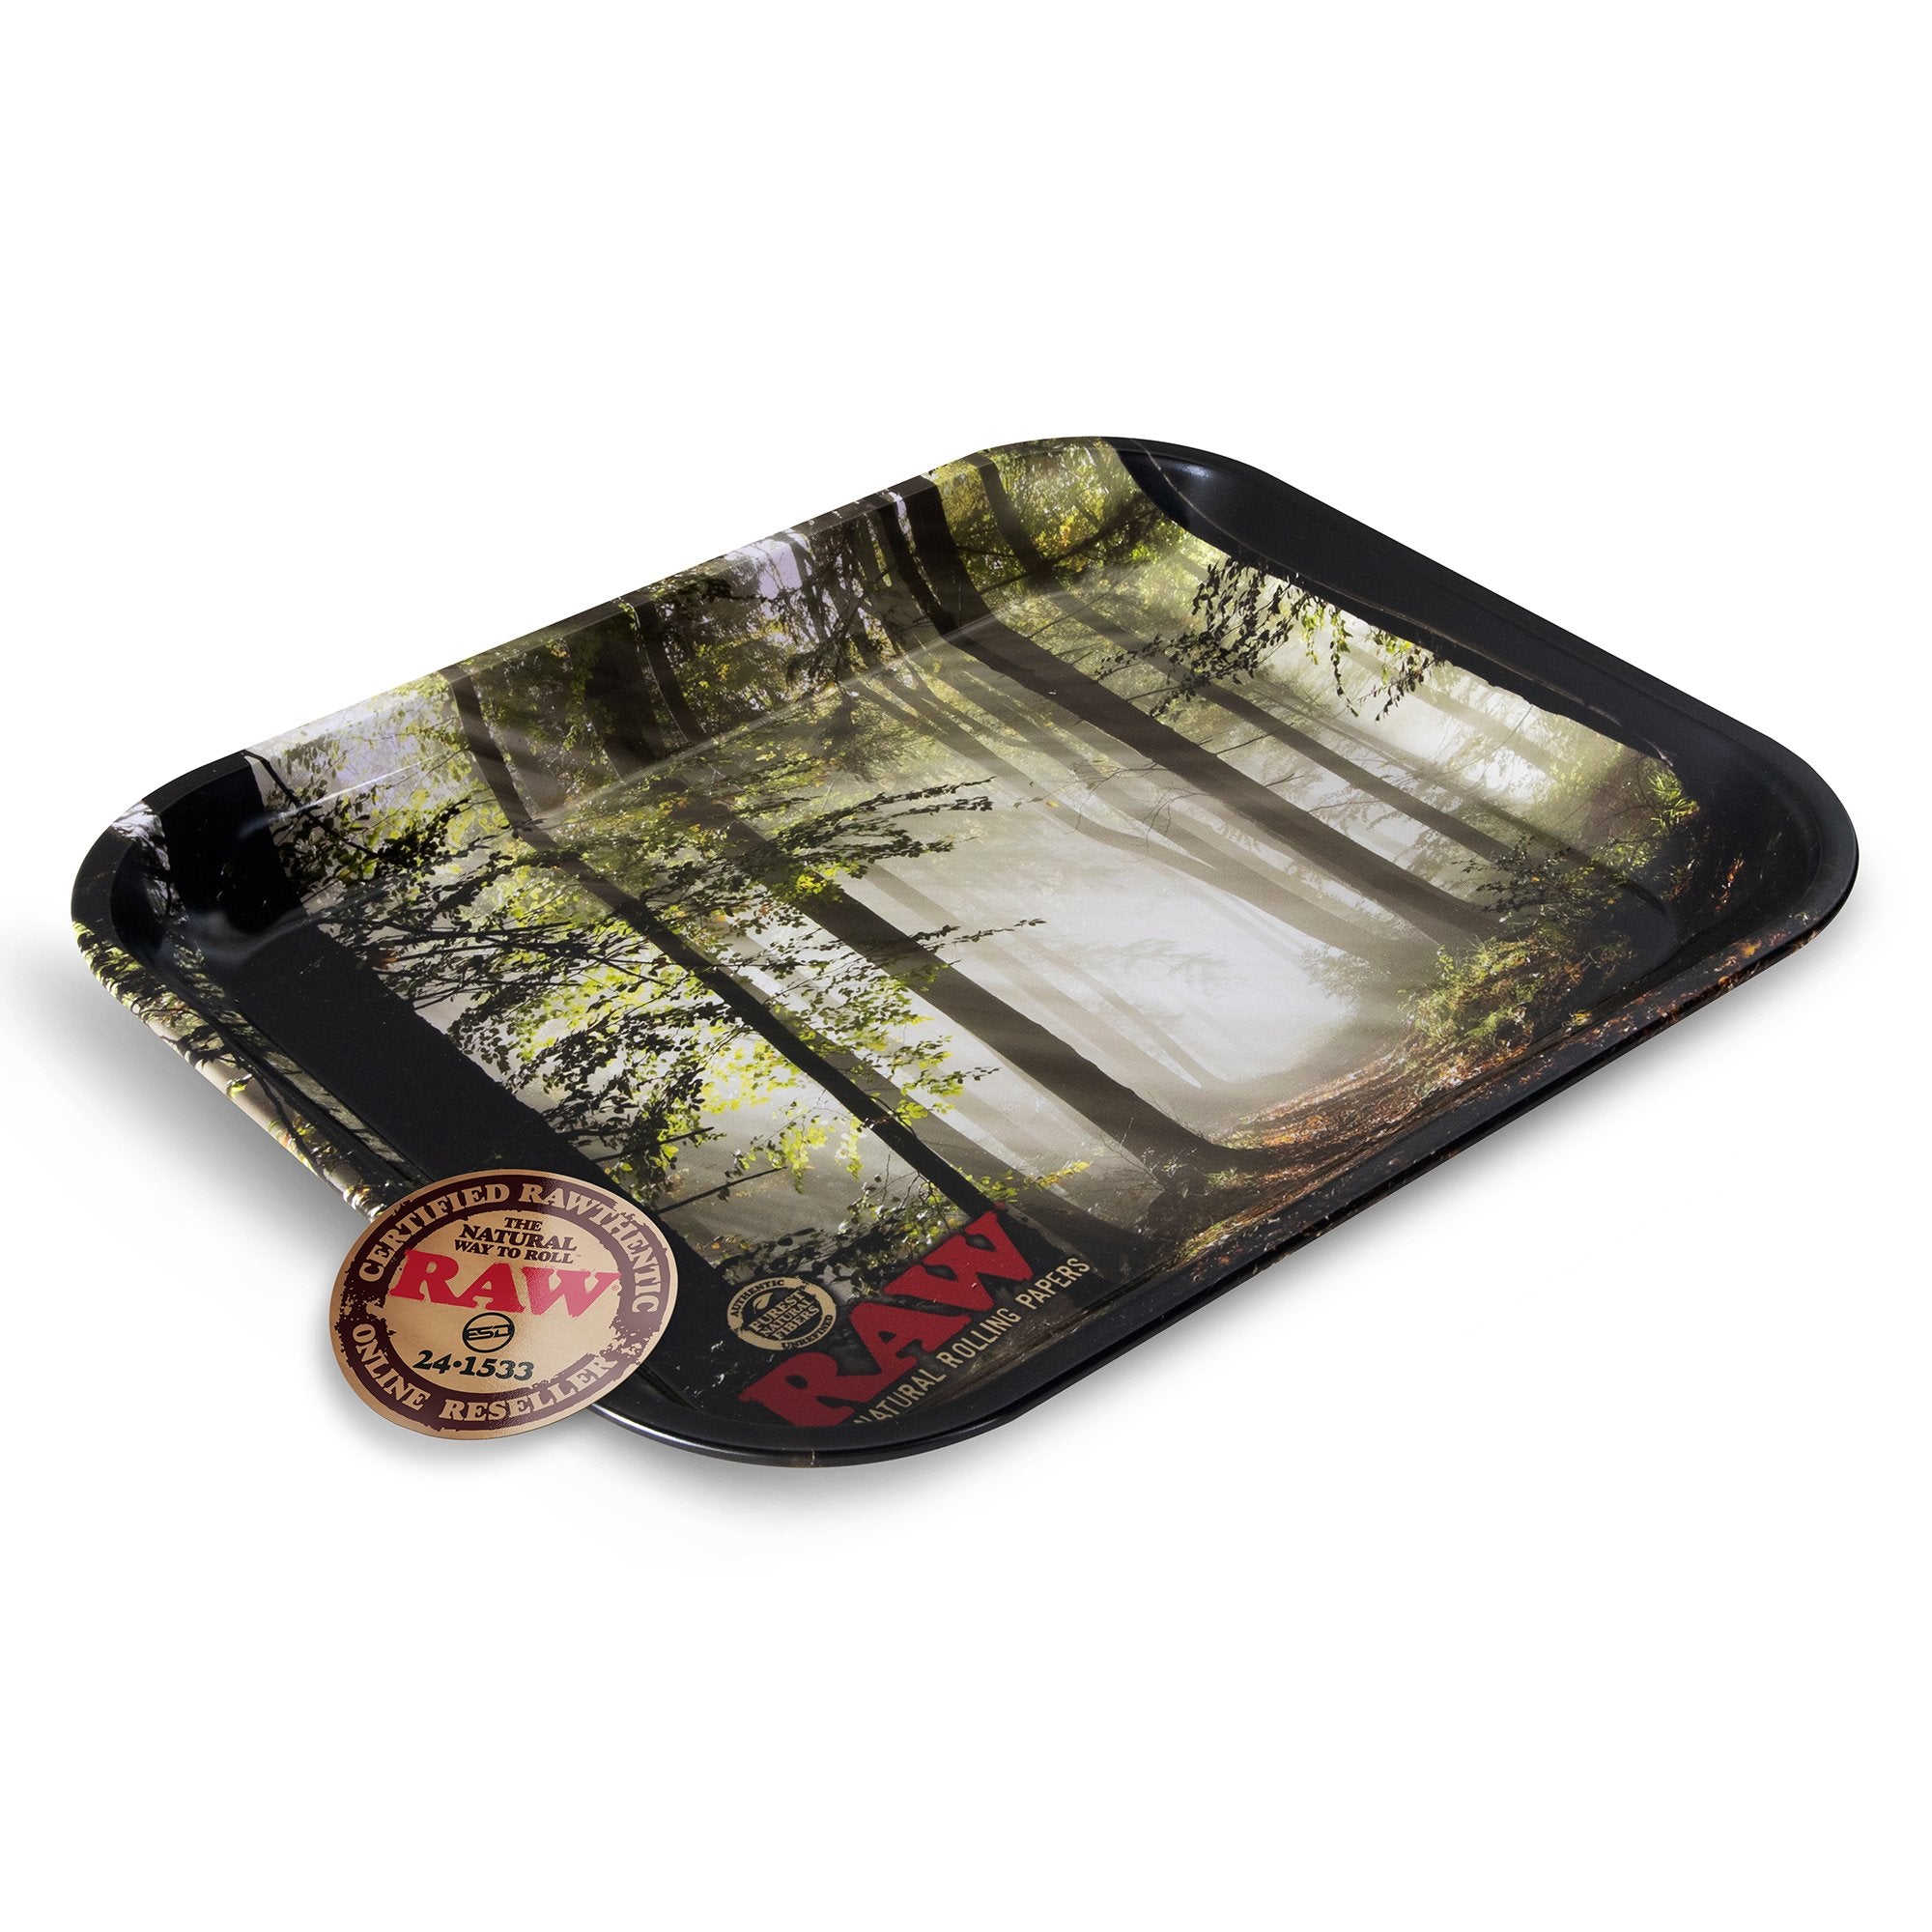 Forest Set – Ceramic Rolling Tray with Grinder – GCC – The GCC